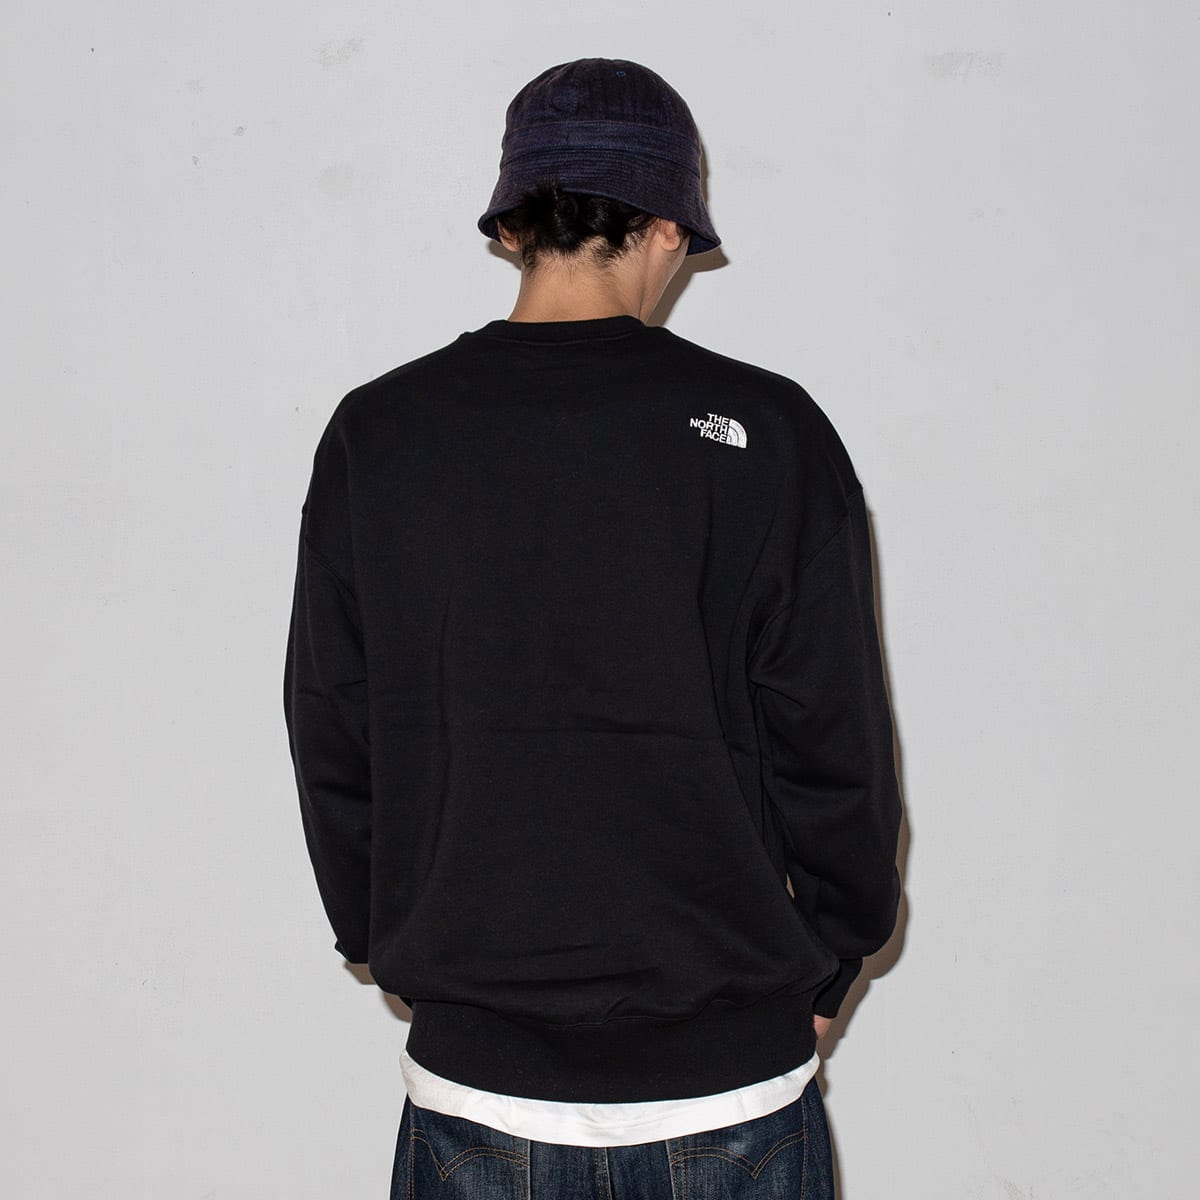 THE NORTH FACE NEVER STOP ING CREW BLACK 23FW-I